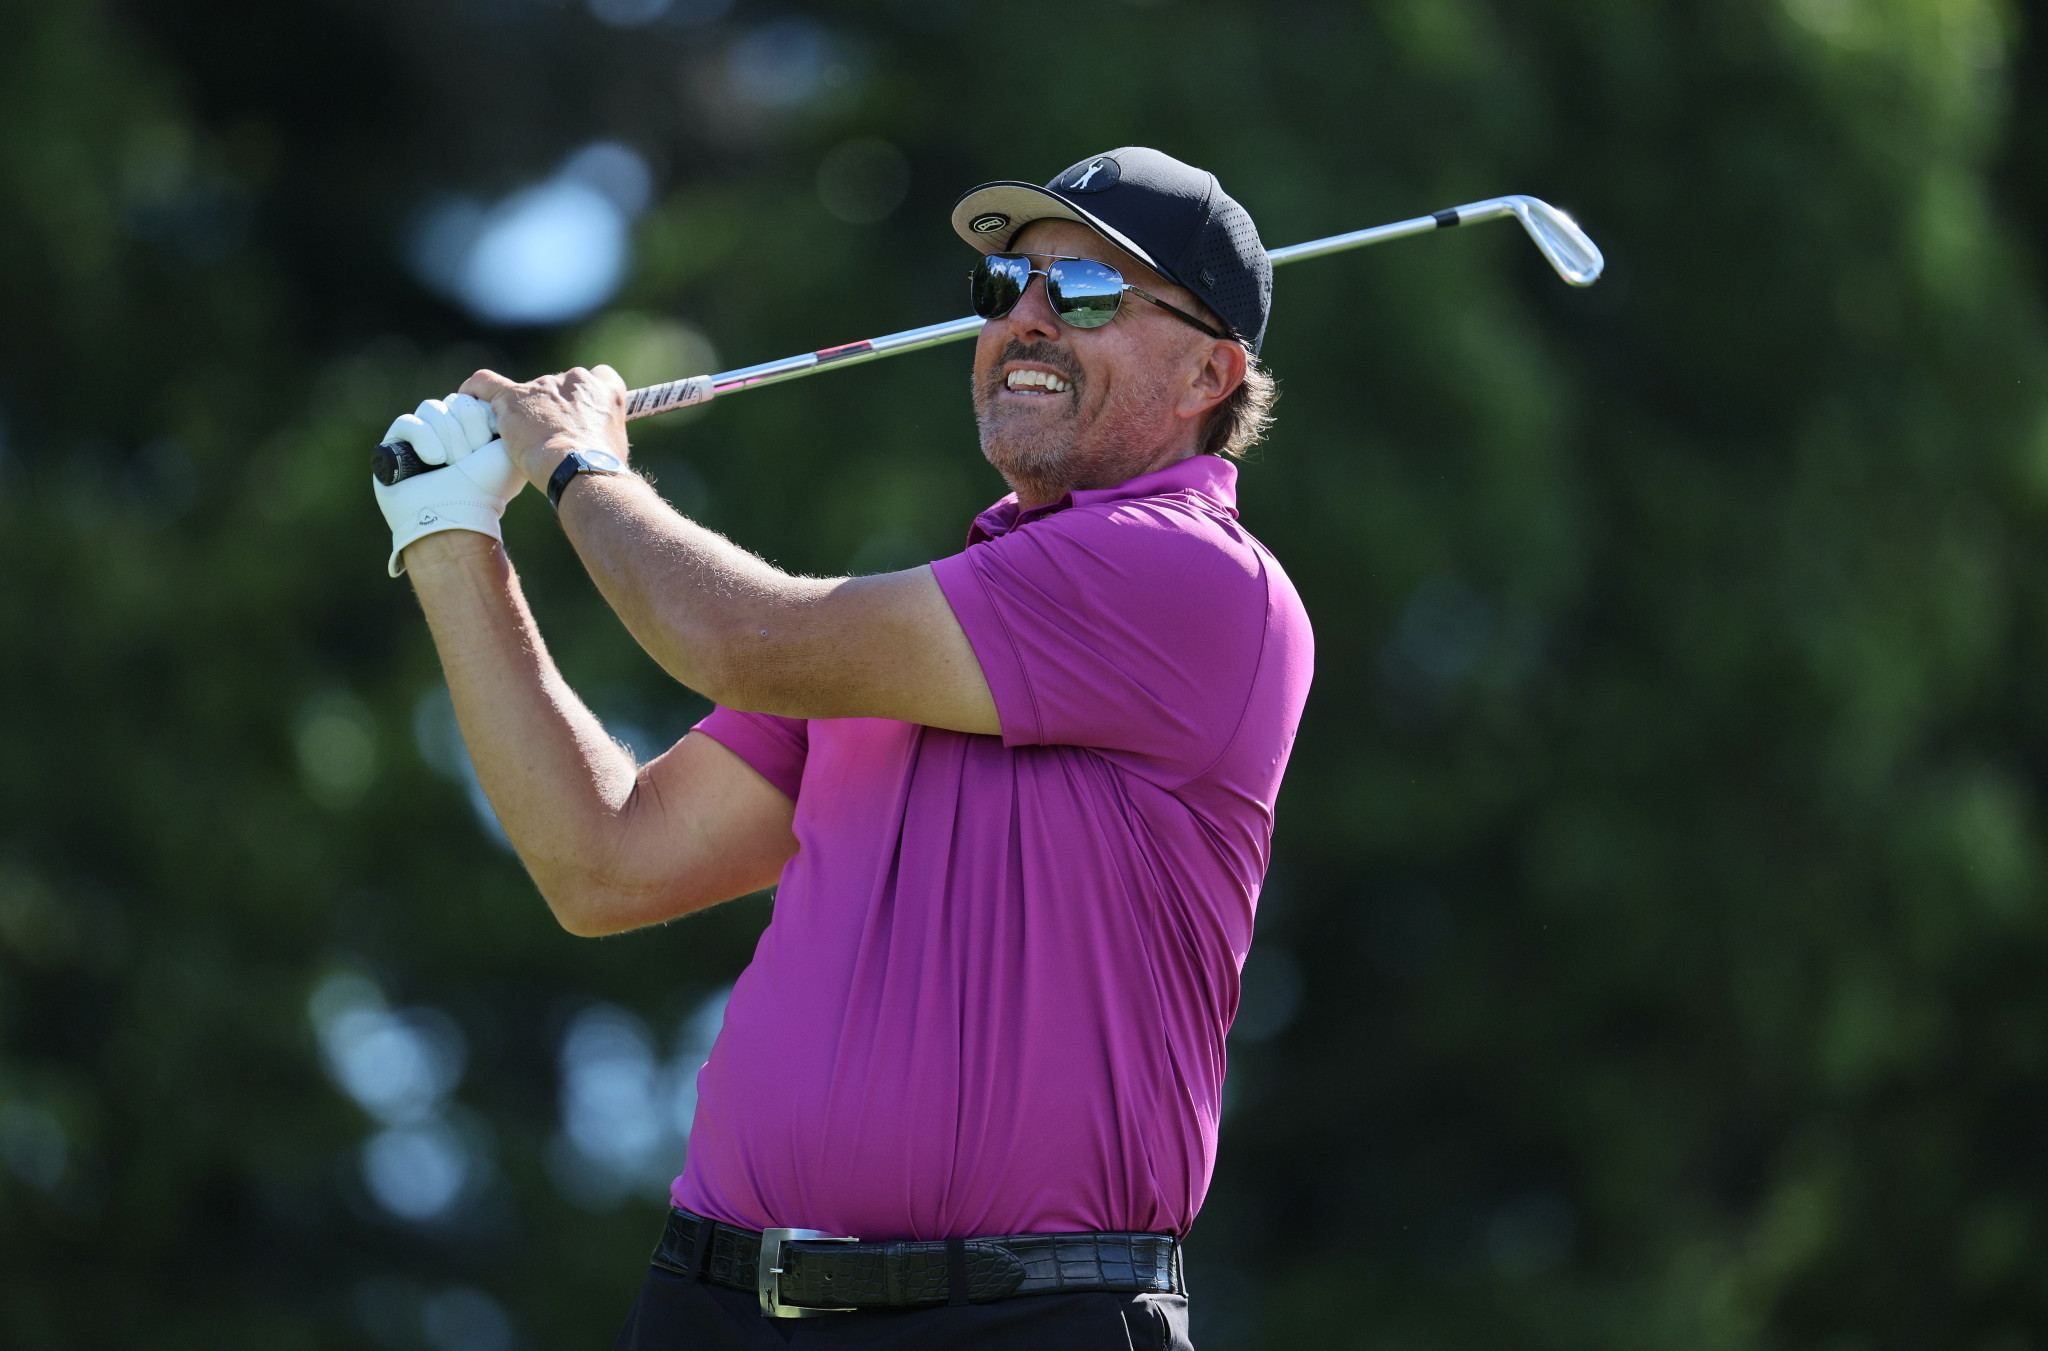 Phil Mickelson of the United States is one of the top golfers who opted to take part in the LIV Golf series ©Getty Images